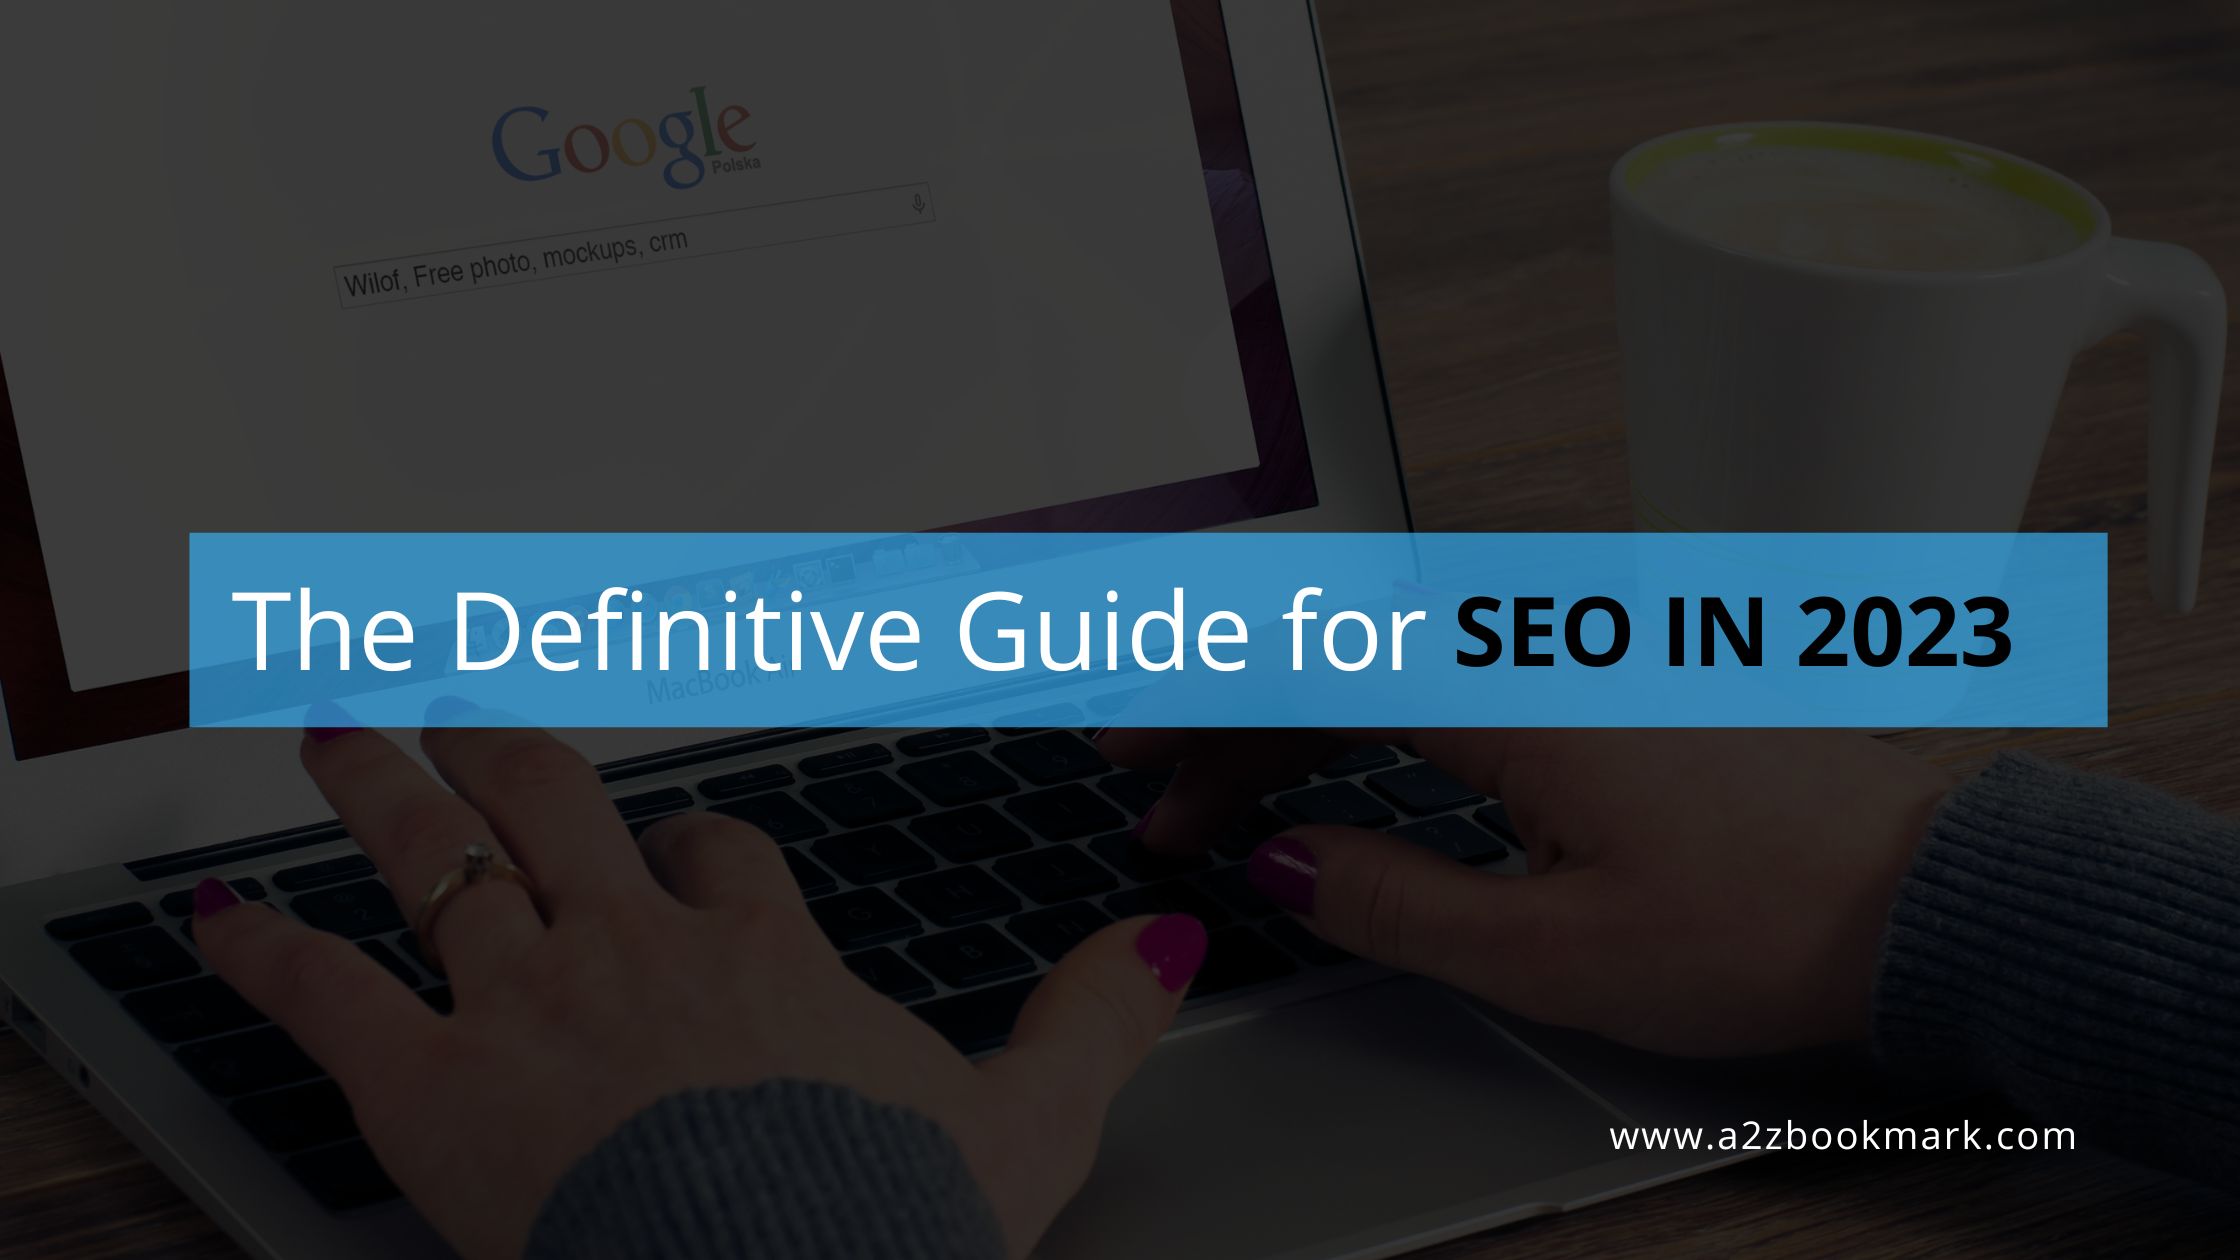 The Definitive Guide for SEO in 2023